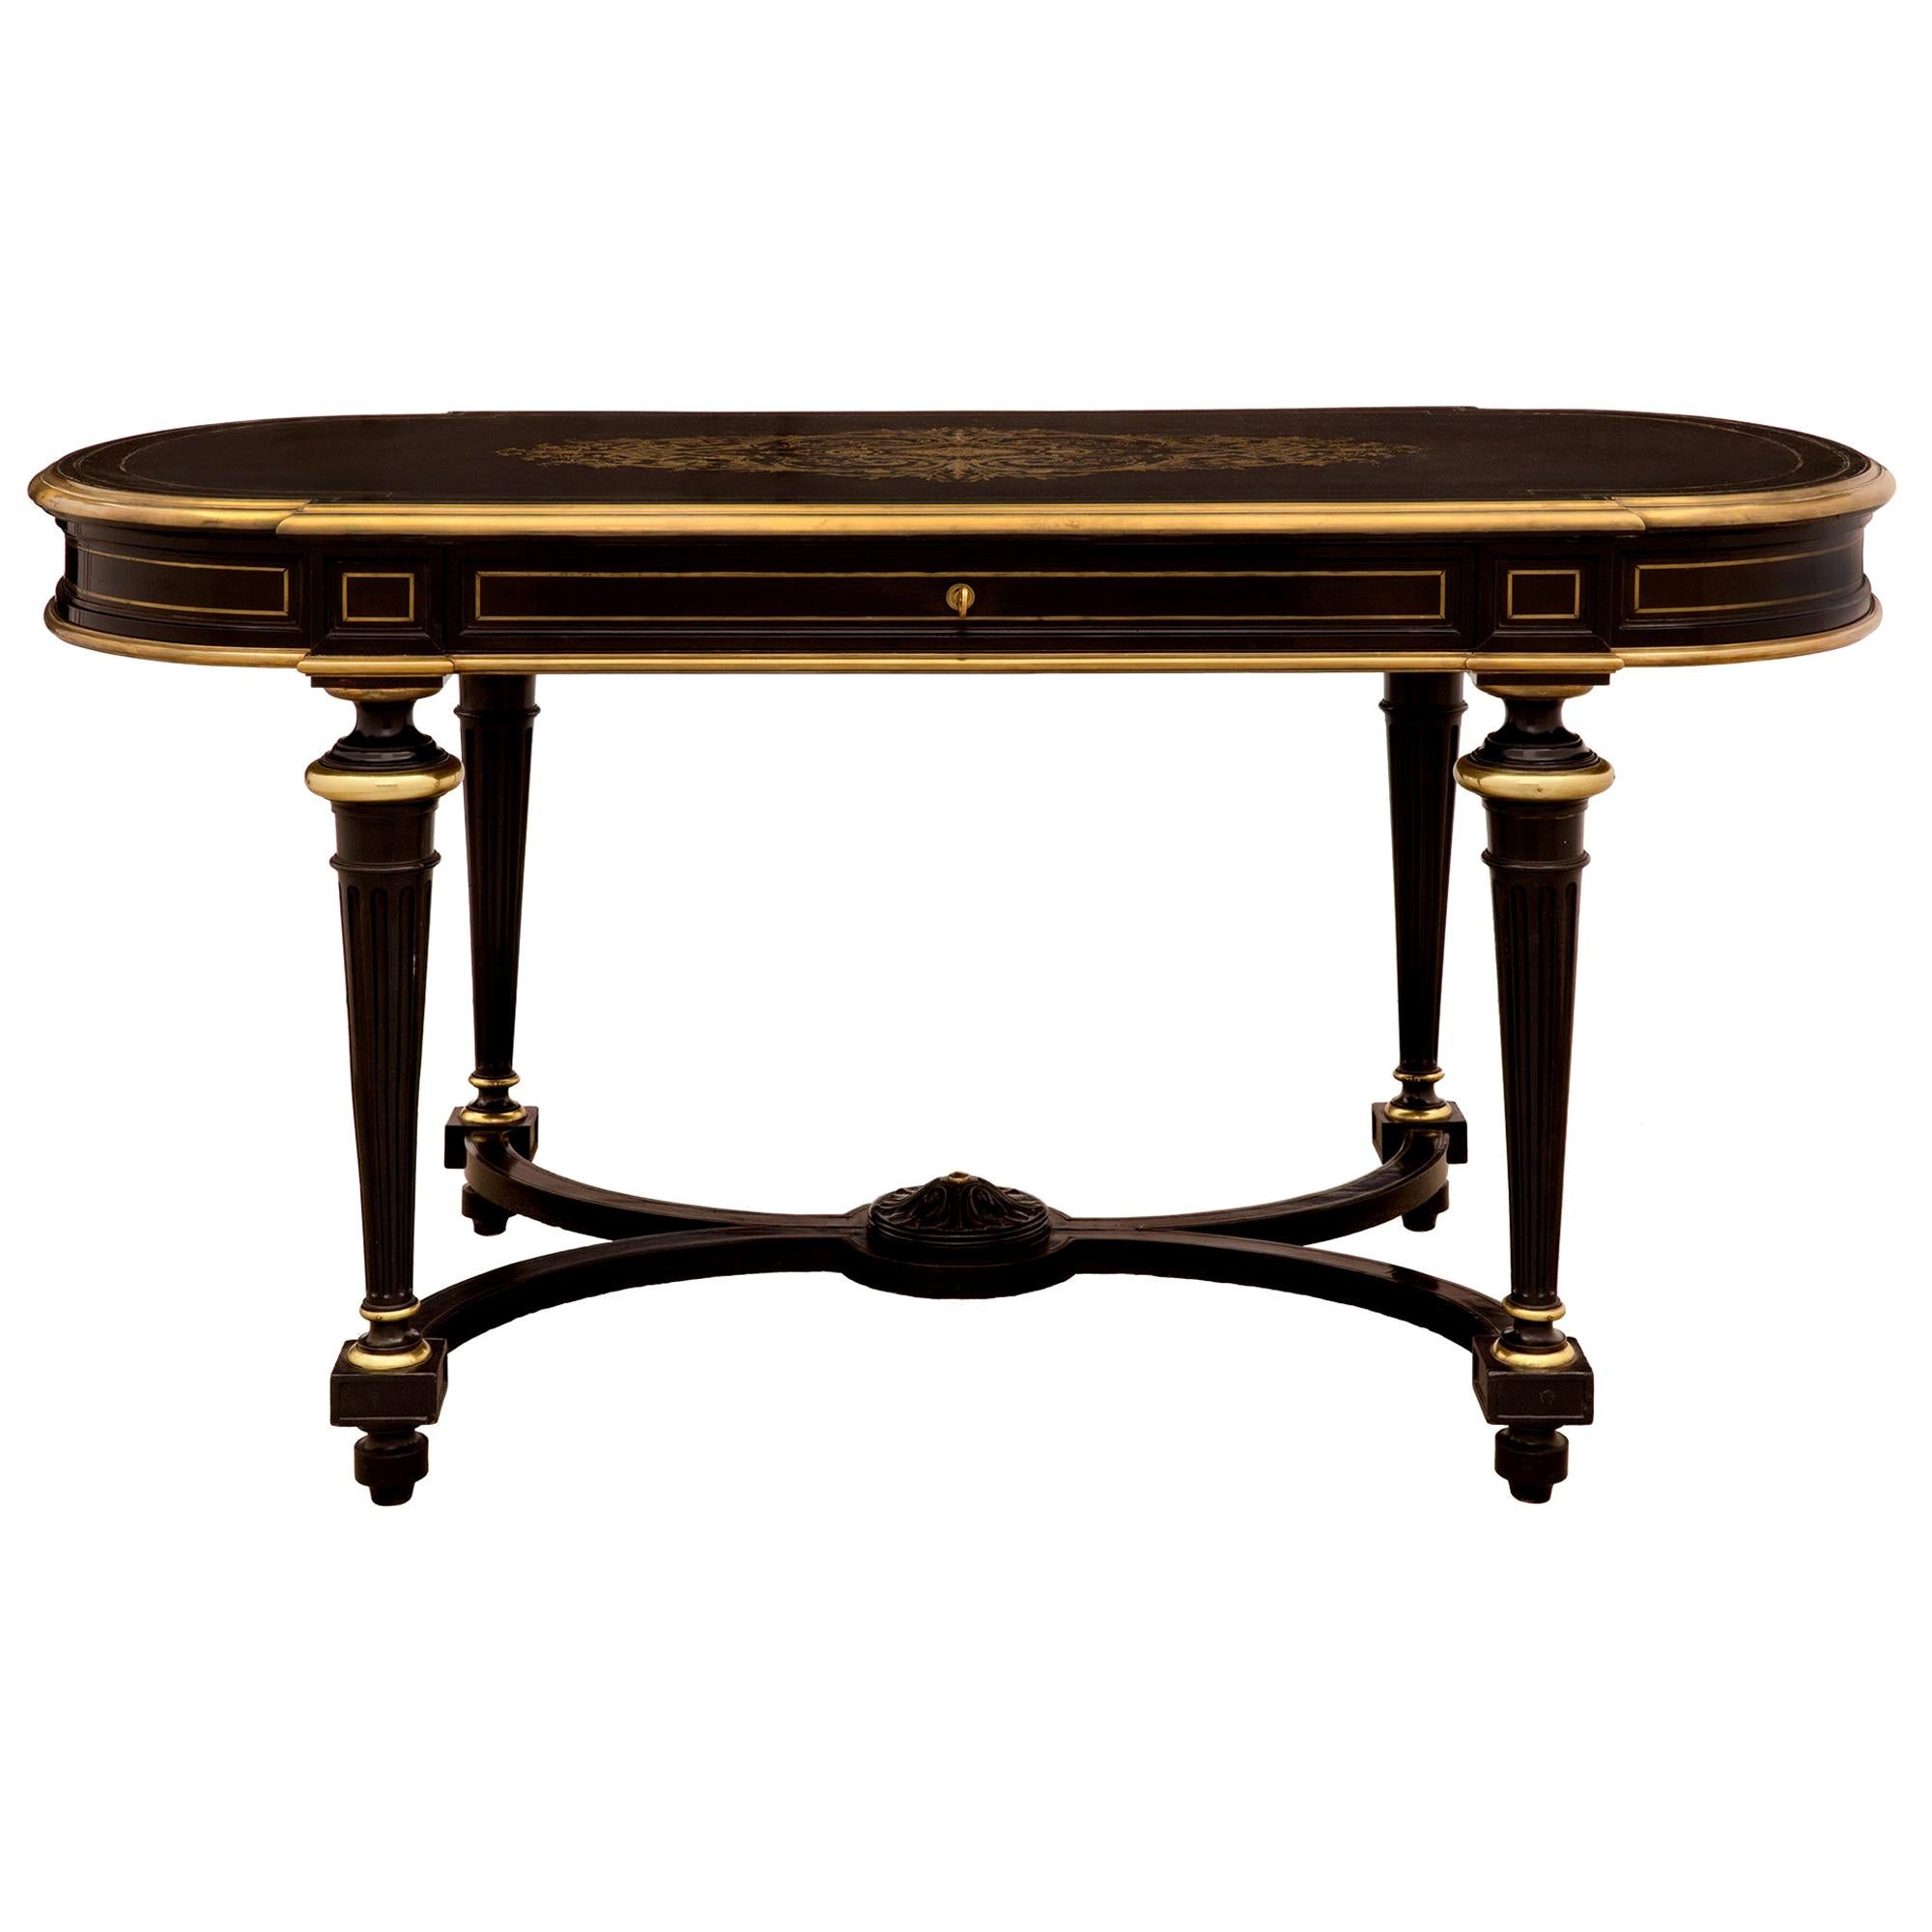 French 19th Century Napoleon III Period Ebony and Brass Inlaid Desk For Sale